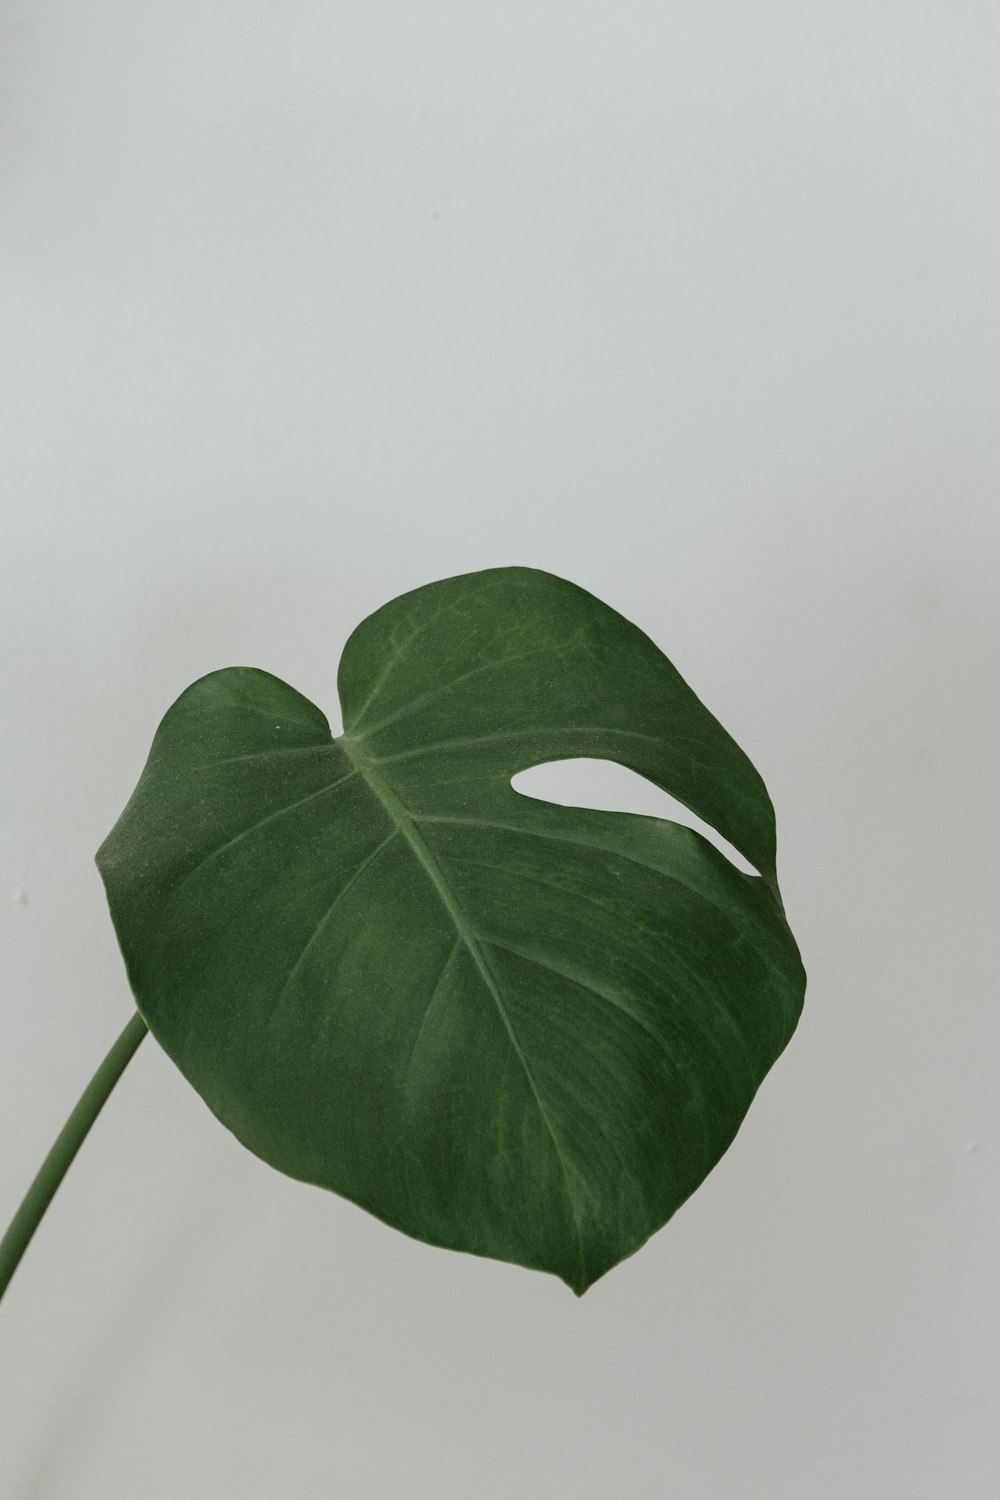 a large green leaf on a white background